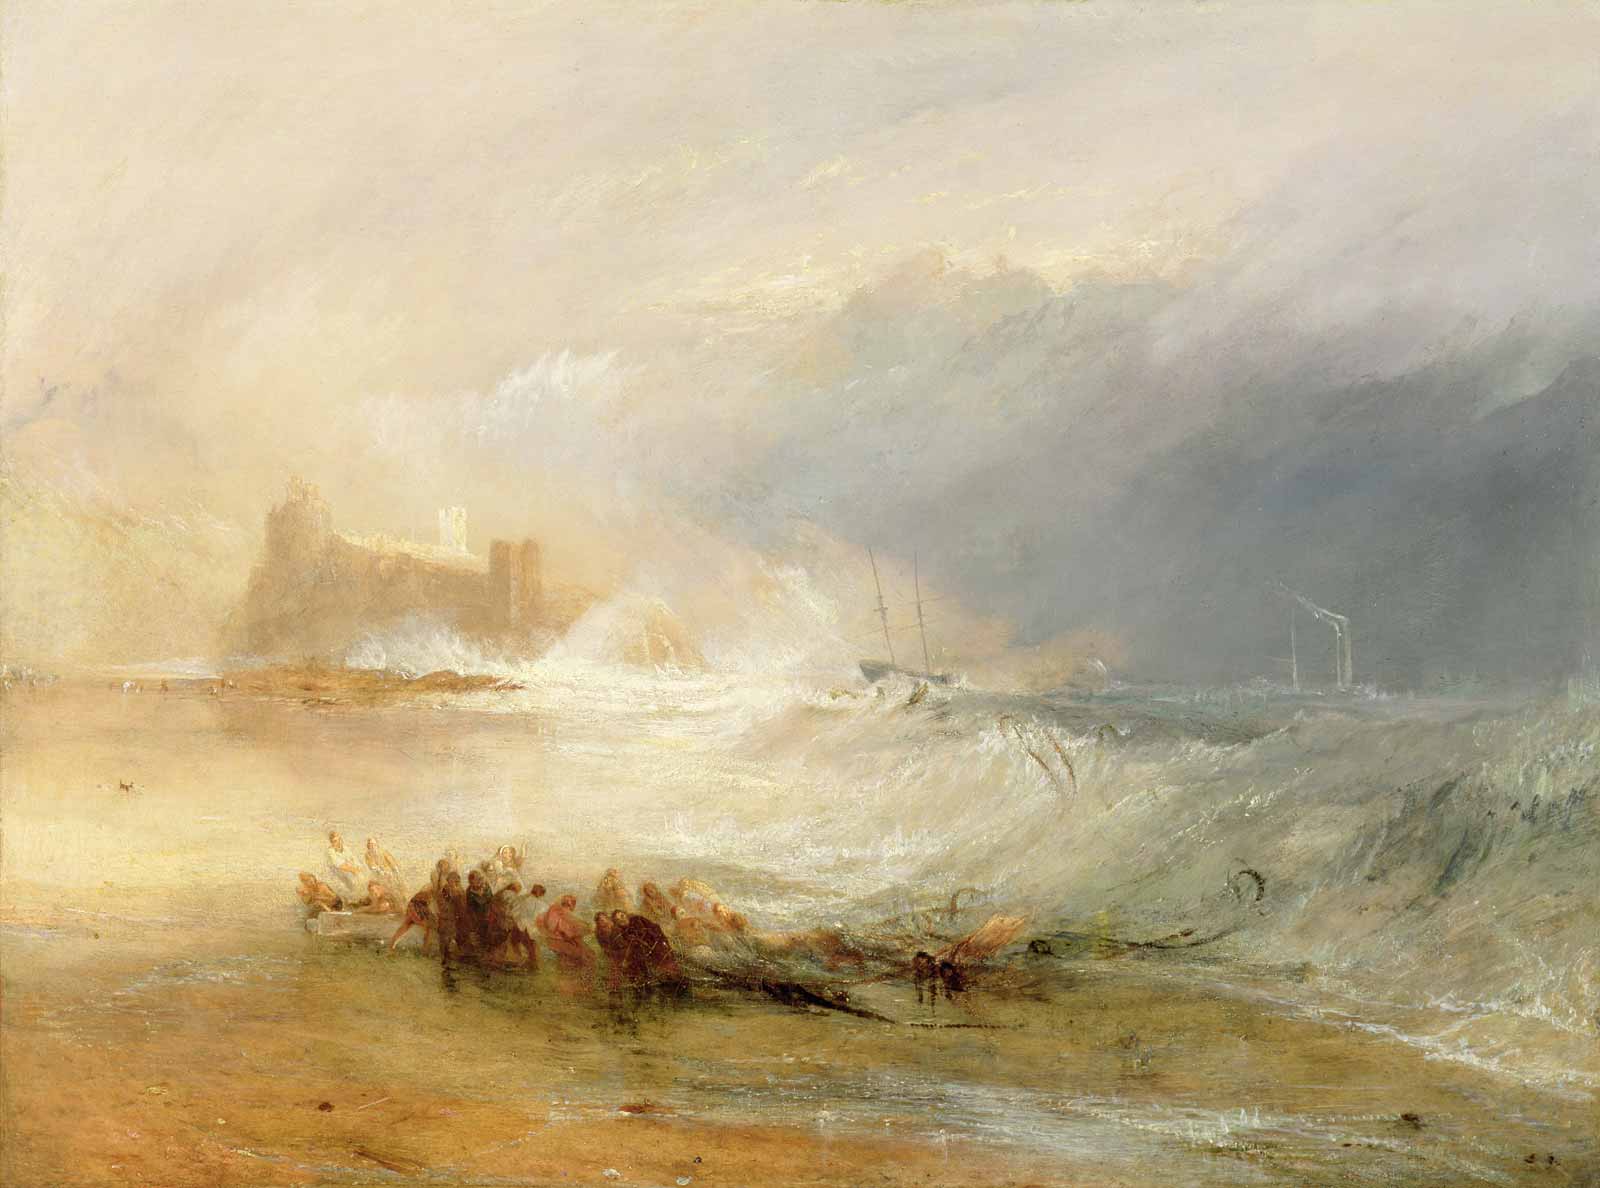 J.M.W. Turner: Wreckers—Coast of Northumberland, with a Steam-Boat Assisting a Ship off Shore, 1834